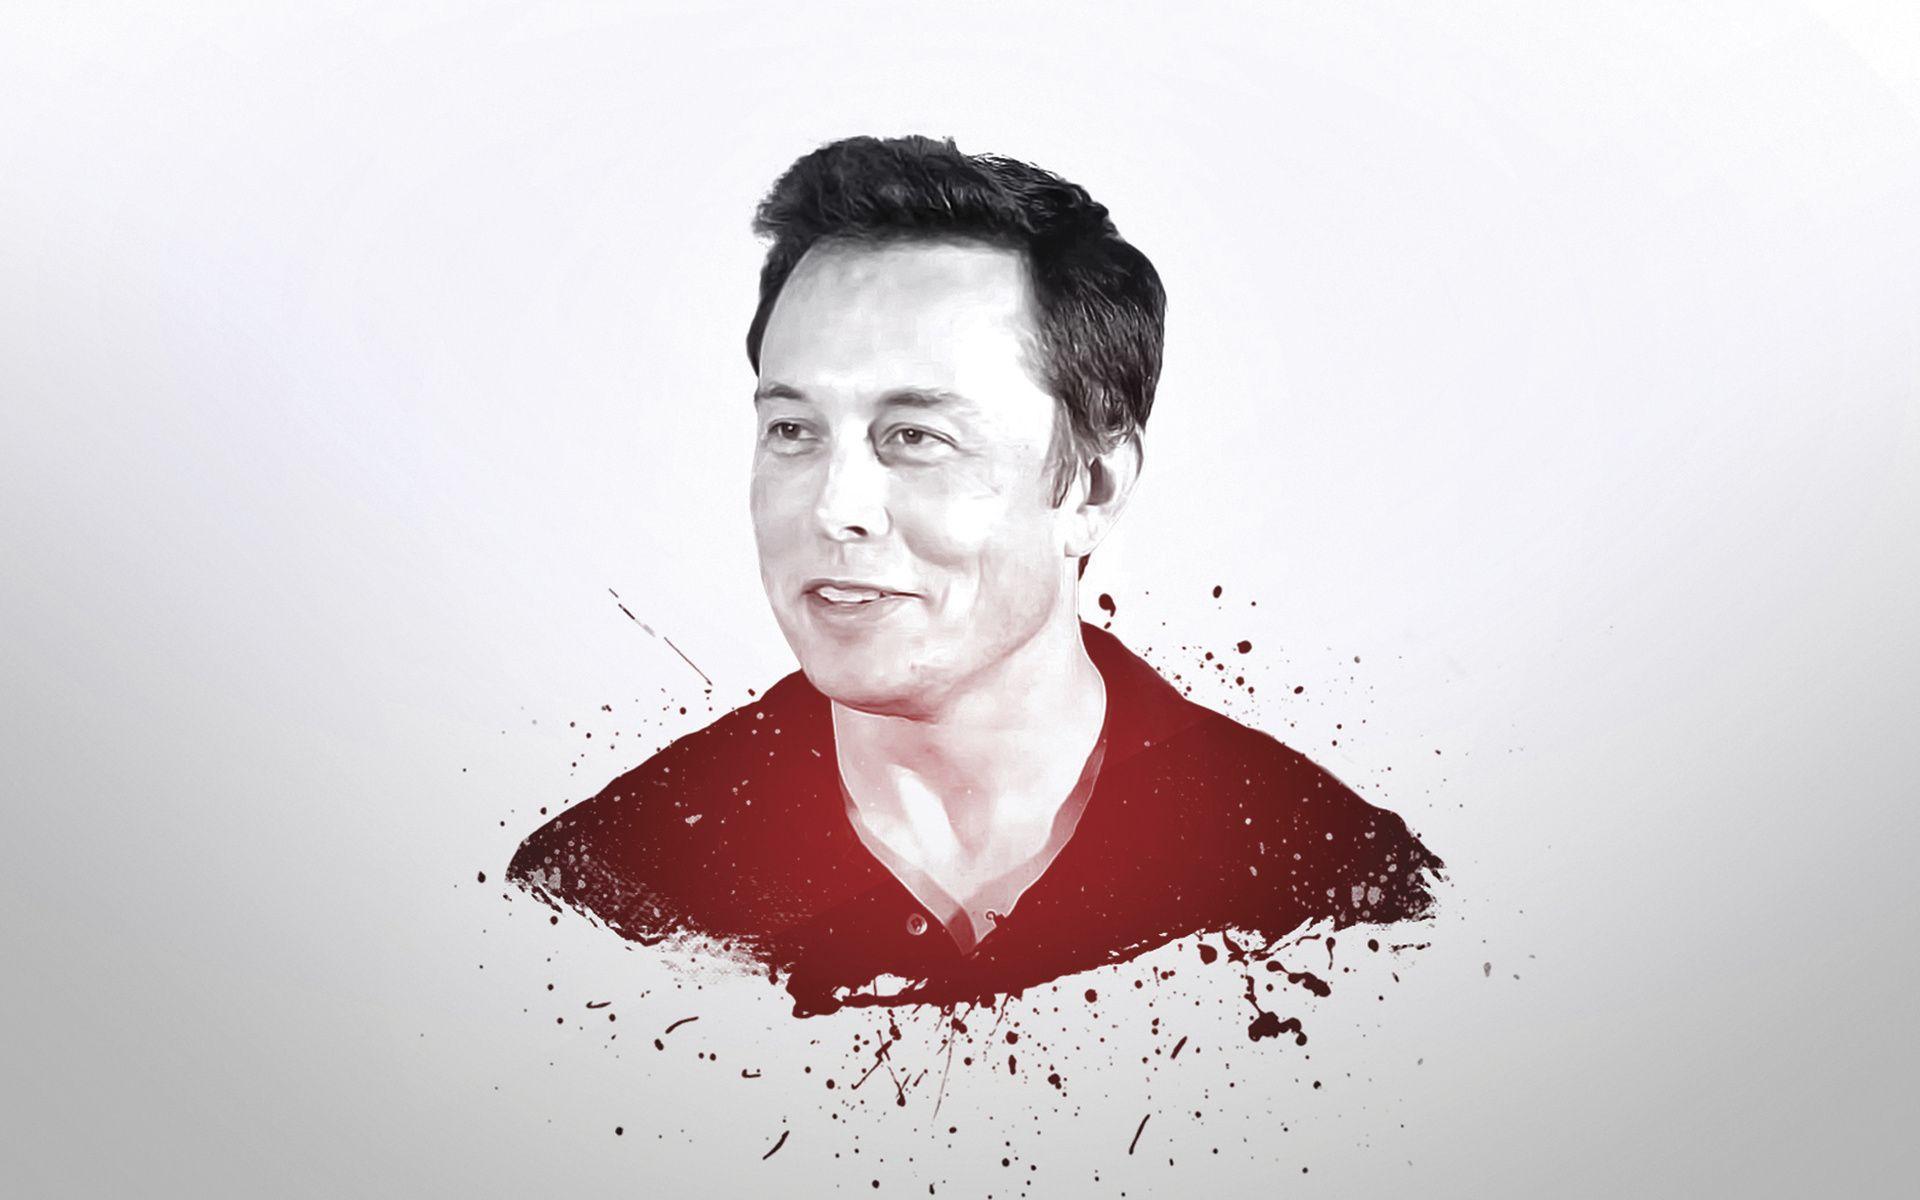 Elon Musk, Spacex, Ceo Of Spacex, Photo Of Elon Musk